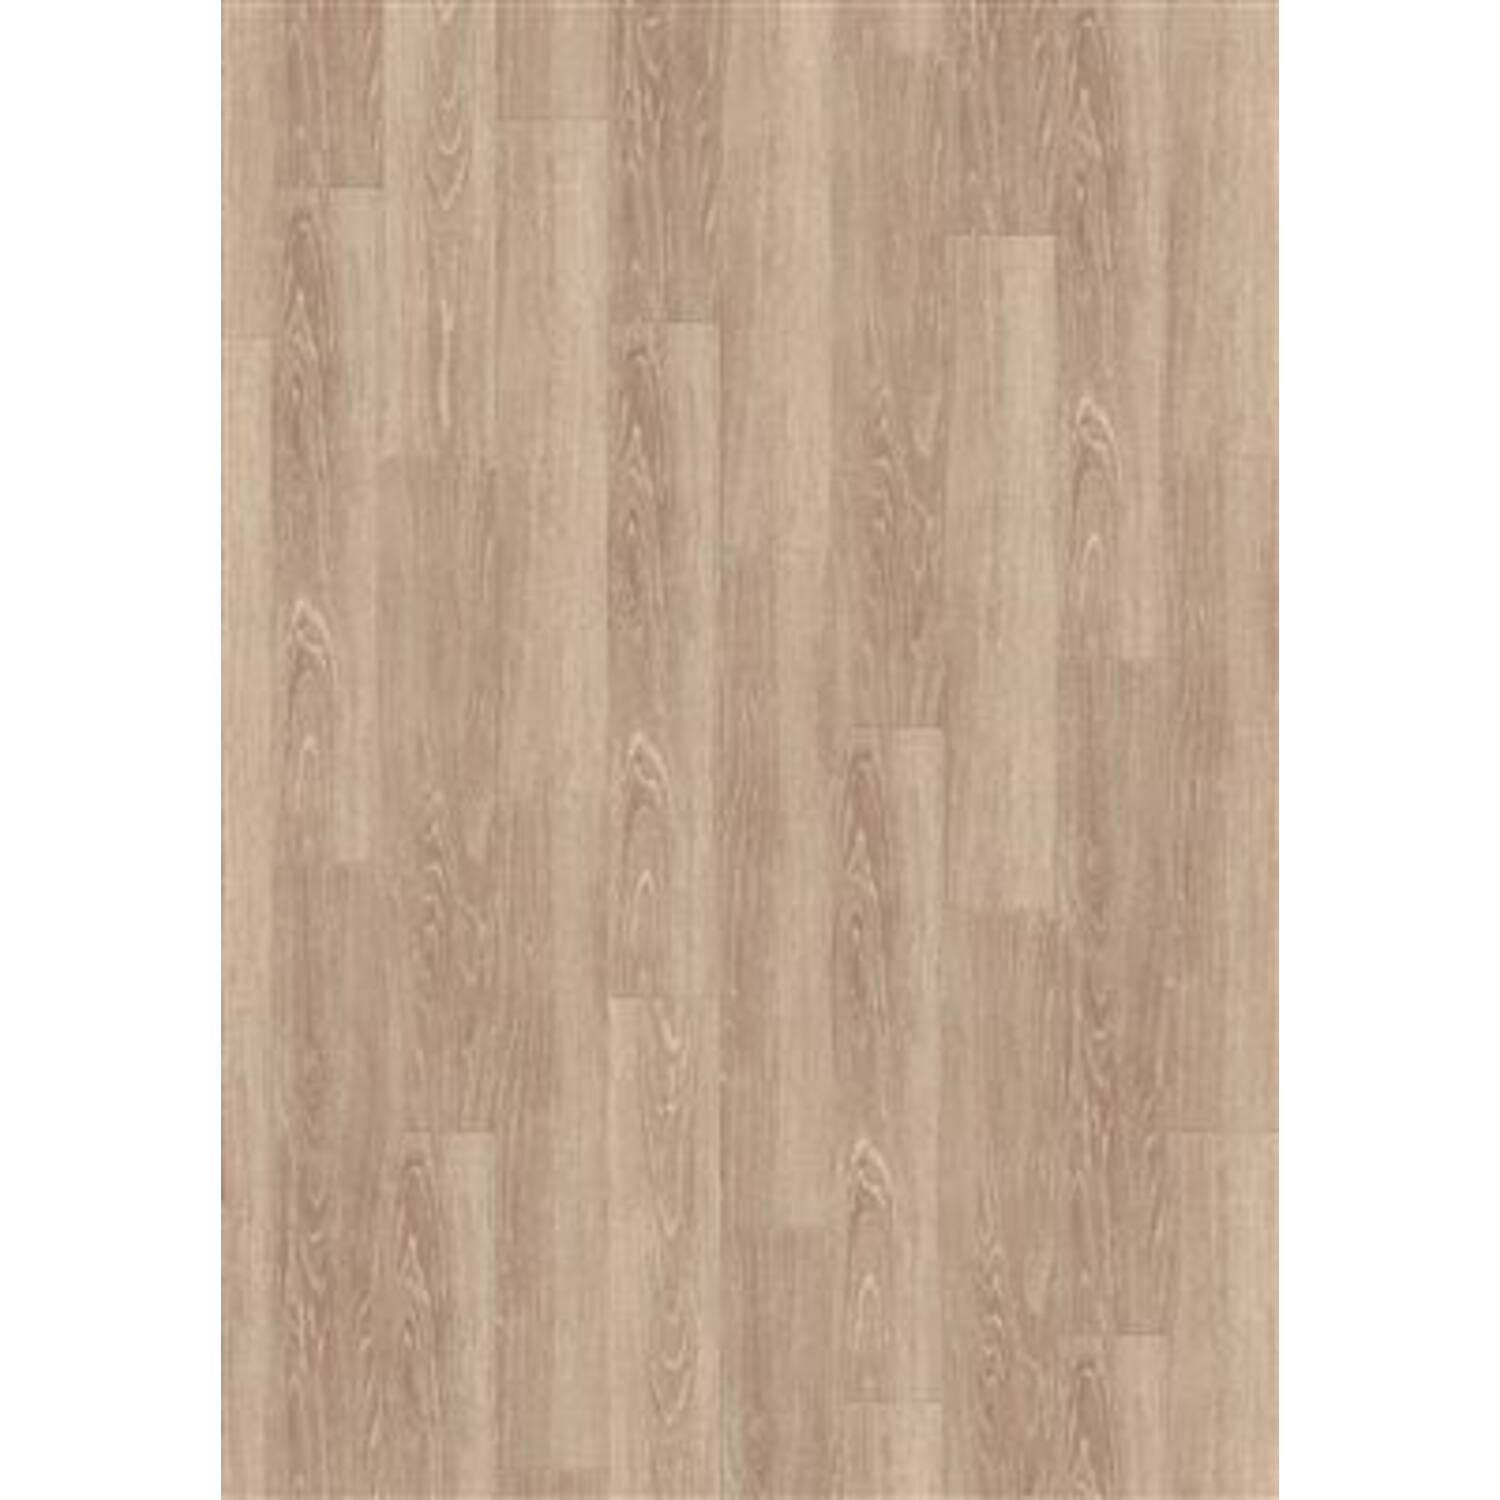 EXPONA Commercial Style 4081 Blond Limed Oak